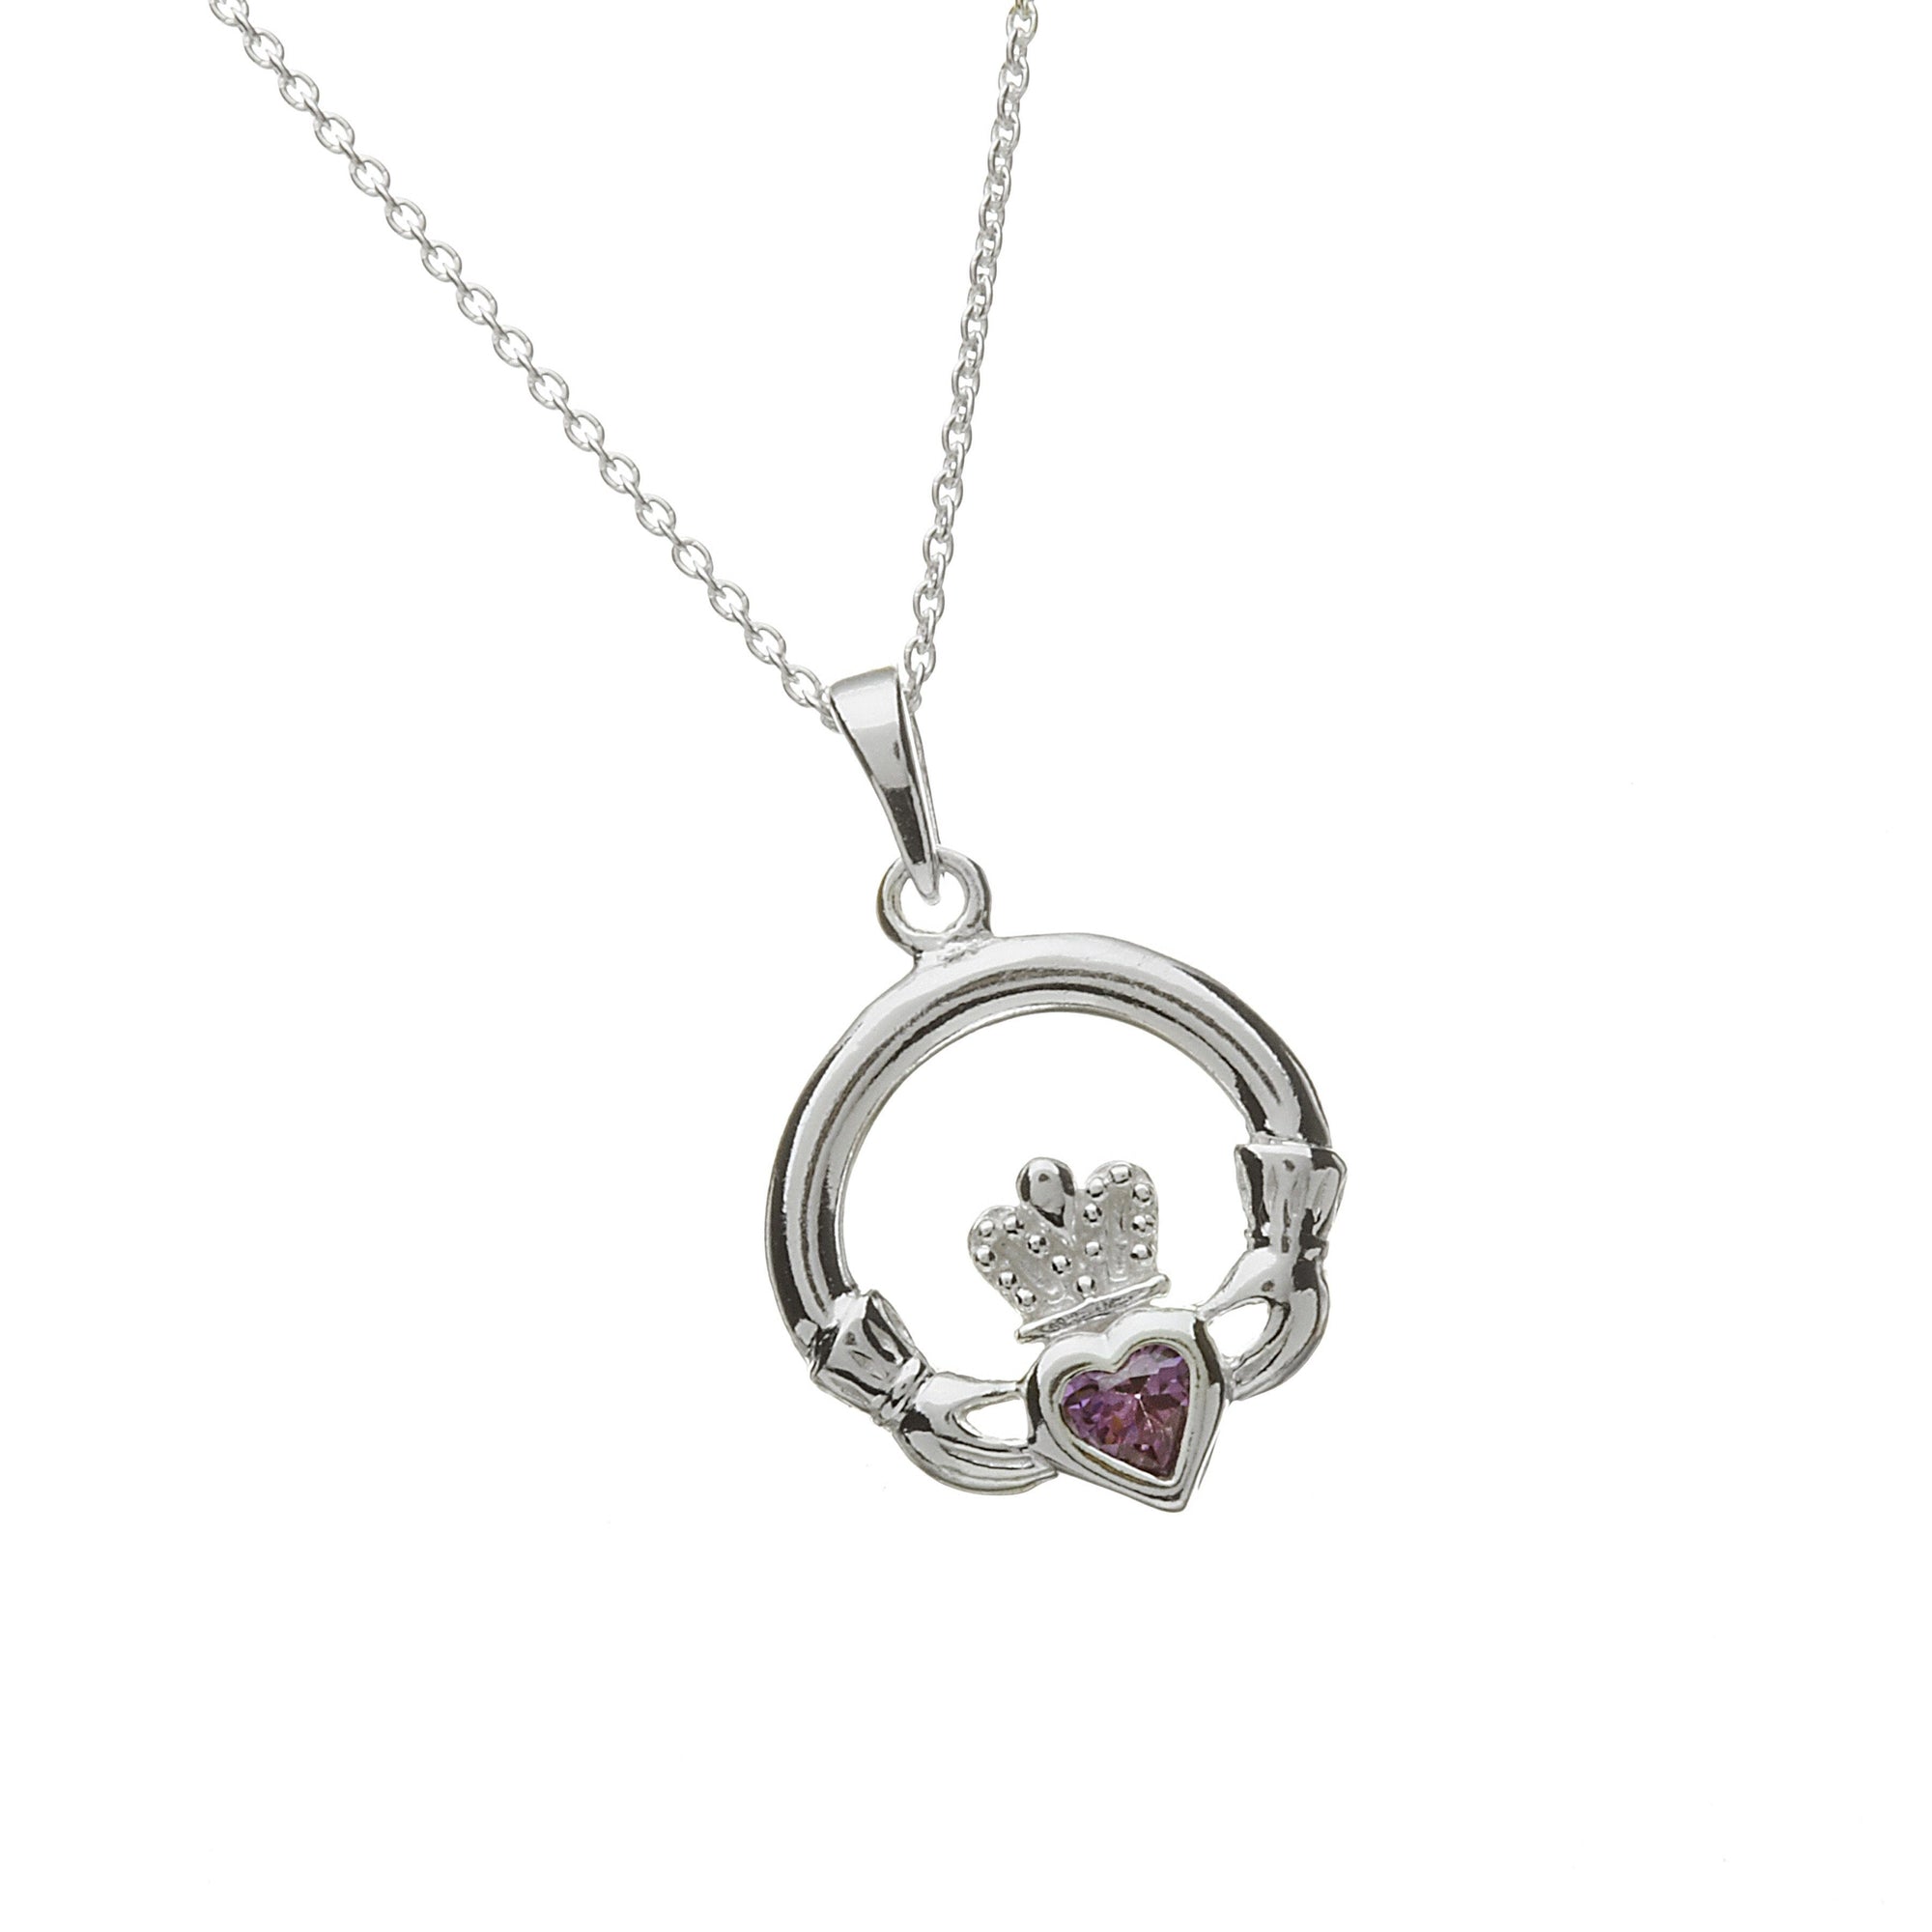 February Birthstone Claddagh Necklace Sterling Silver Claddagh Birthstone Necklace for February Aces Jewellers 